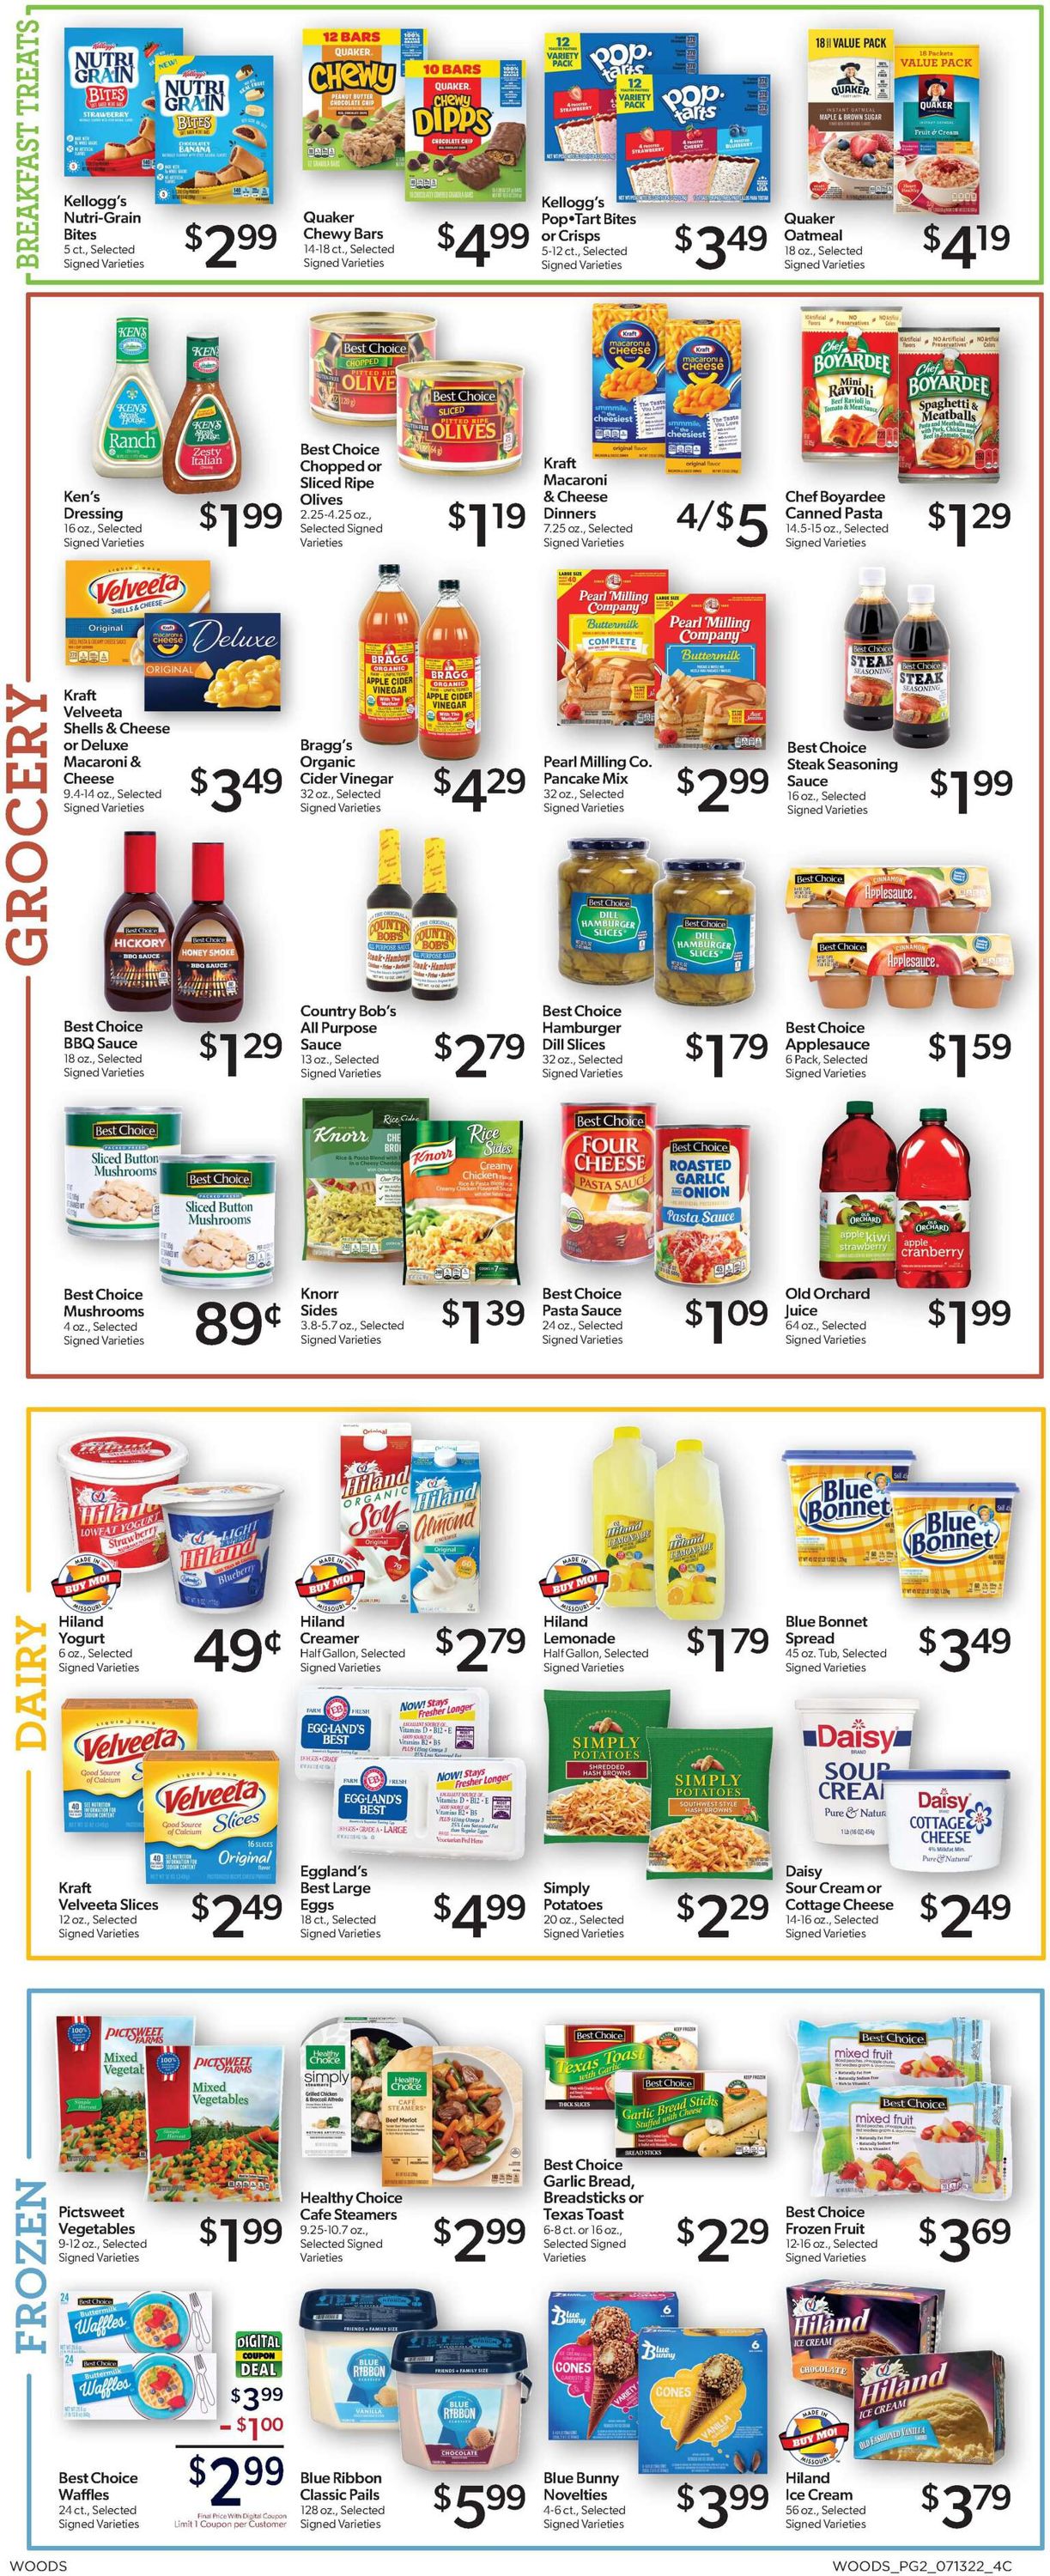 Woods Supermarket Ad from 07/13/2022